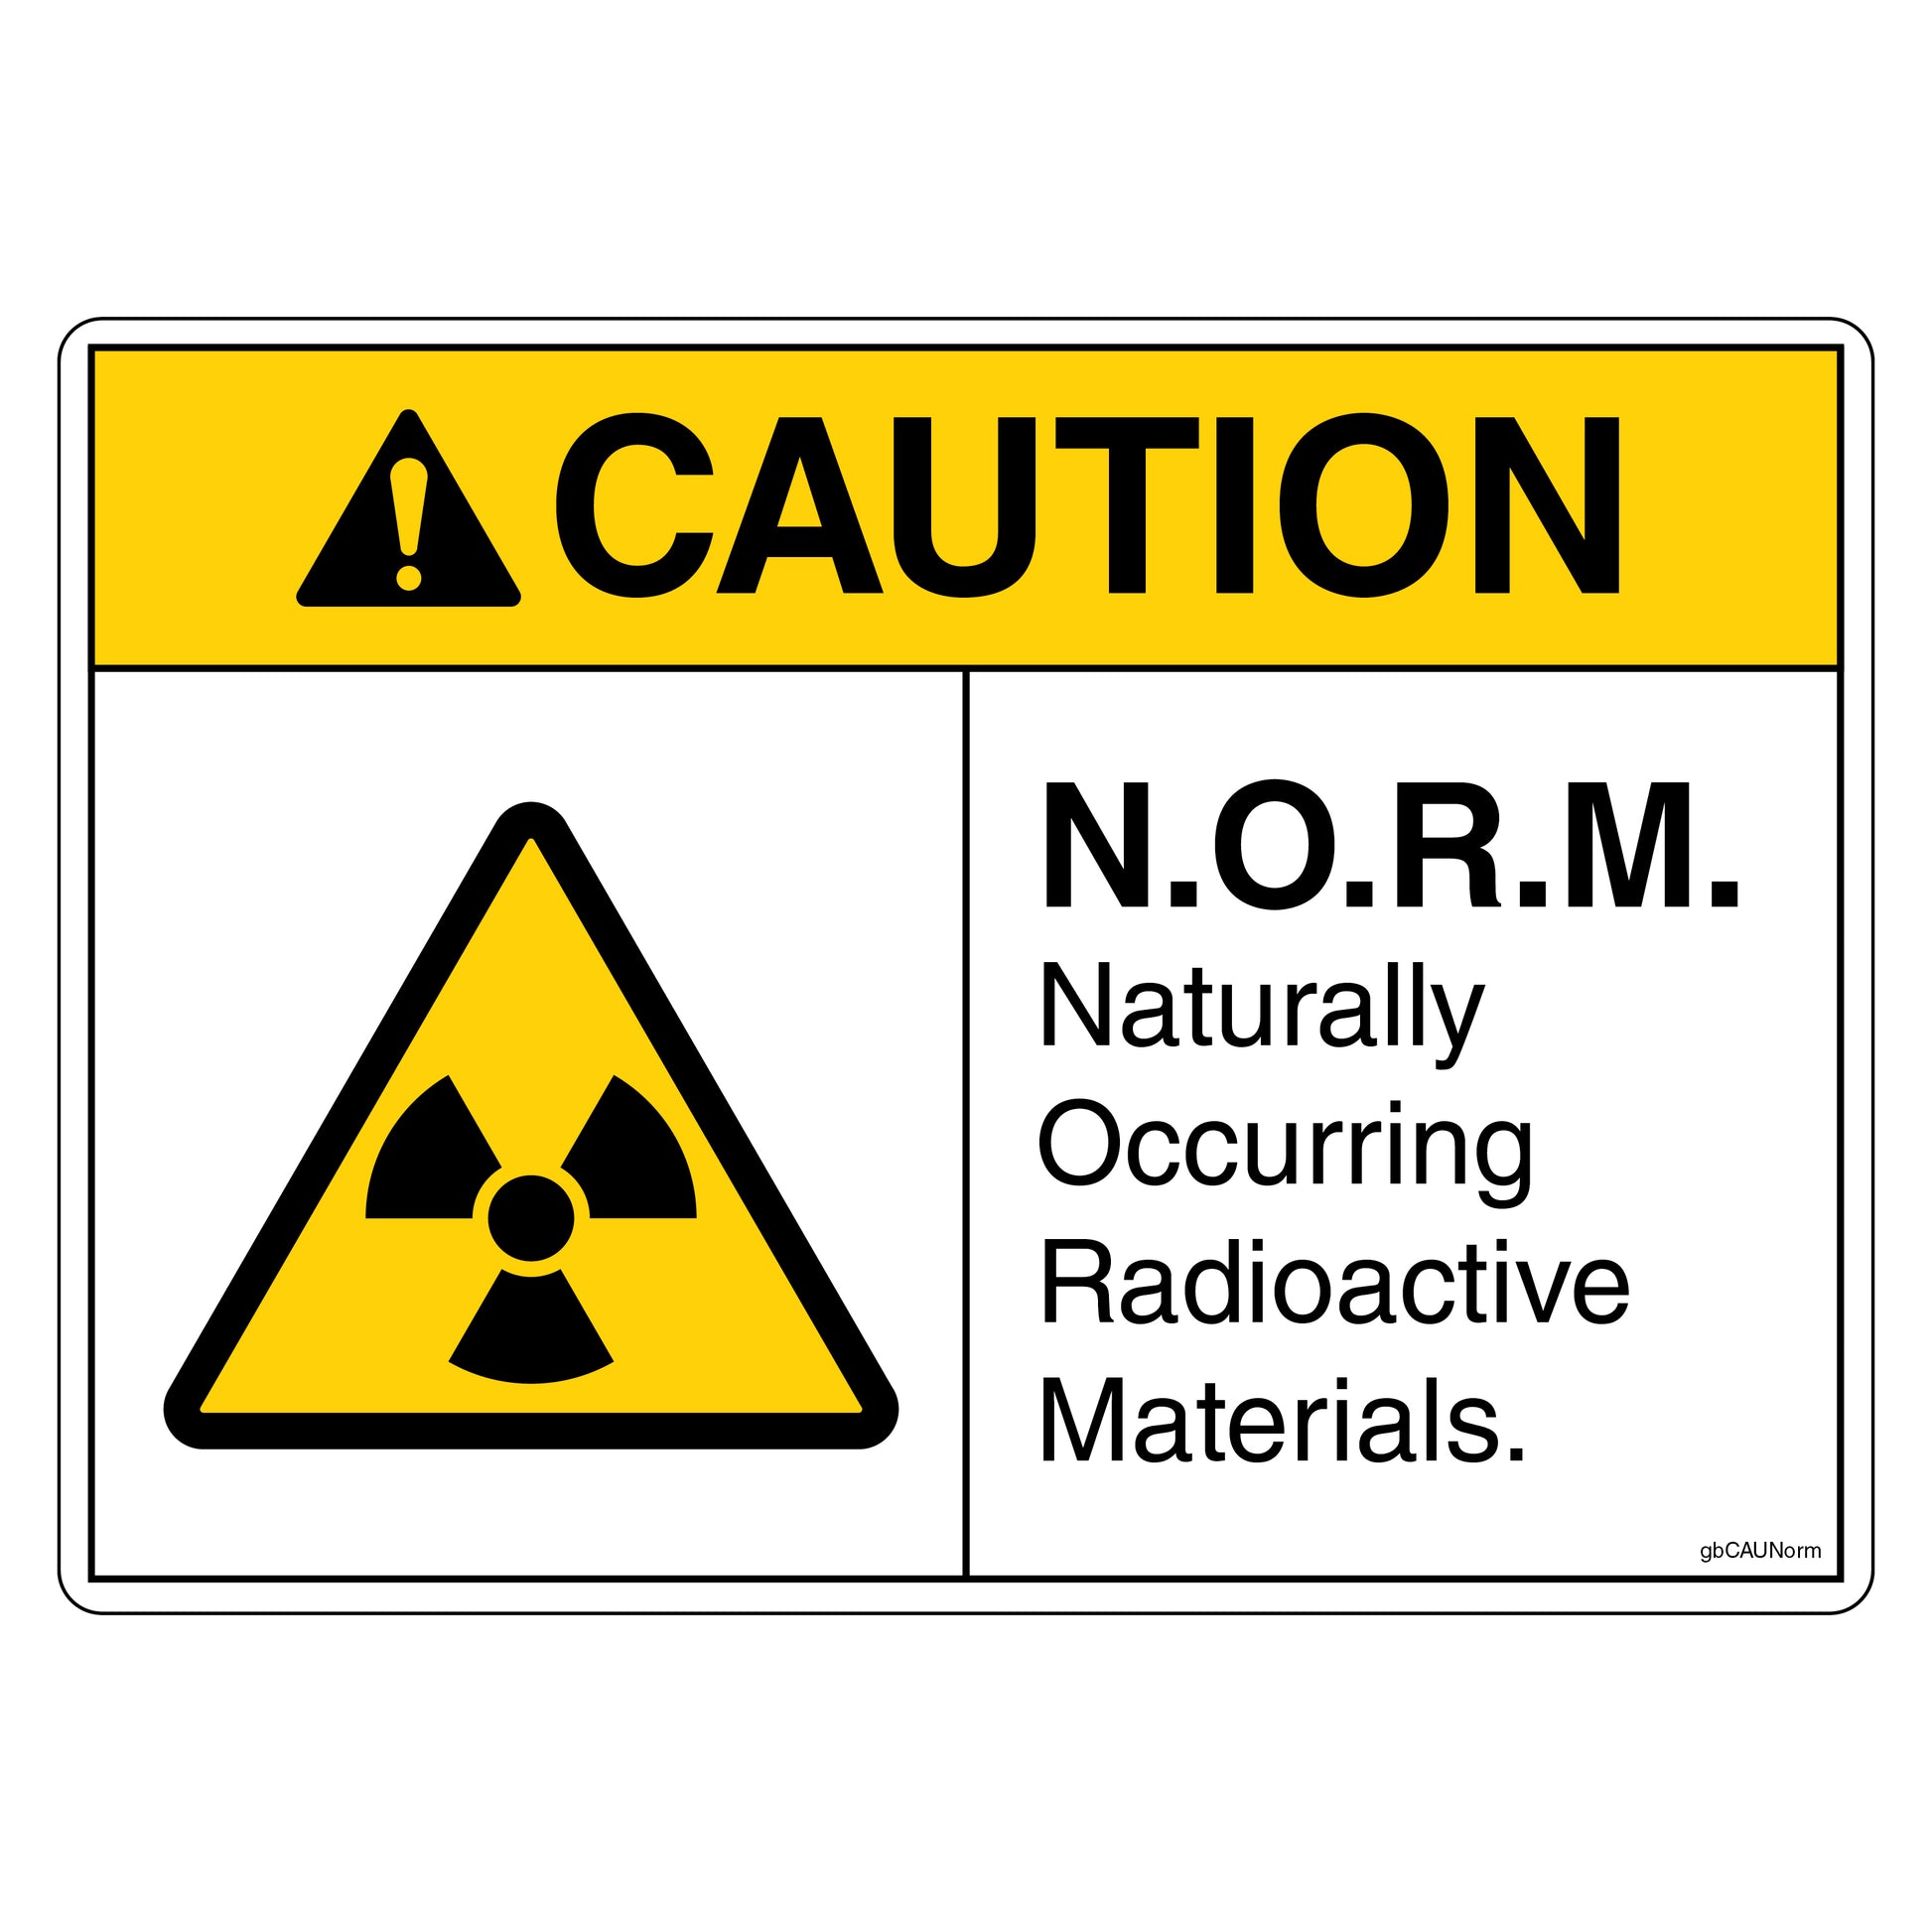 Caution Norm (Naturally Occurring Radioactive Materials) Decal.